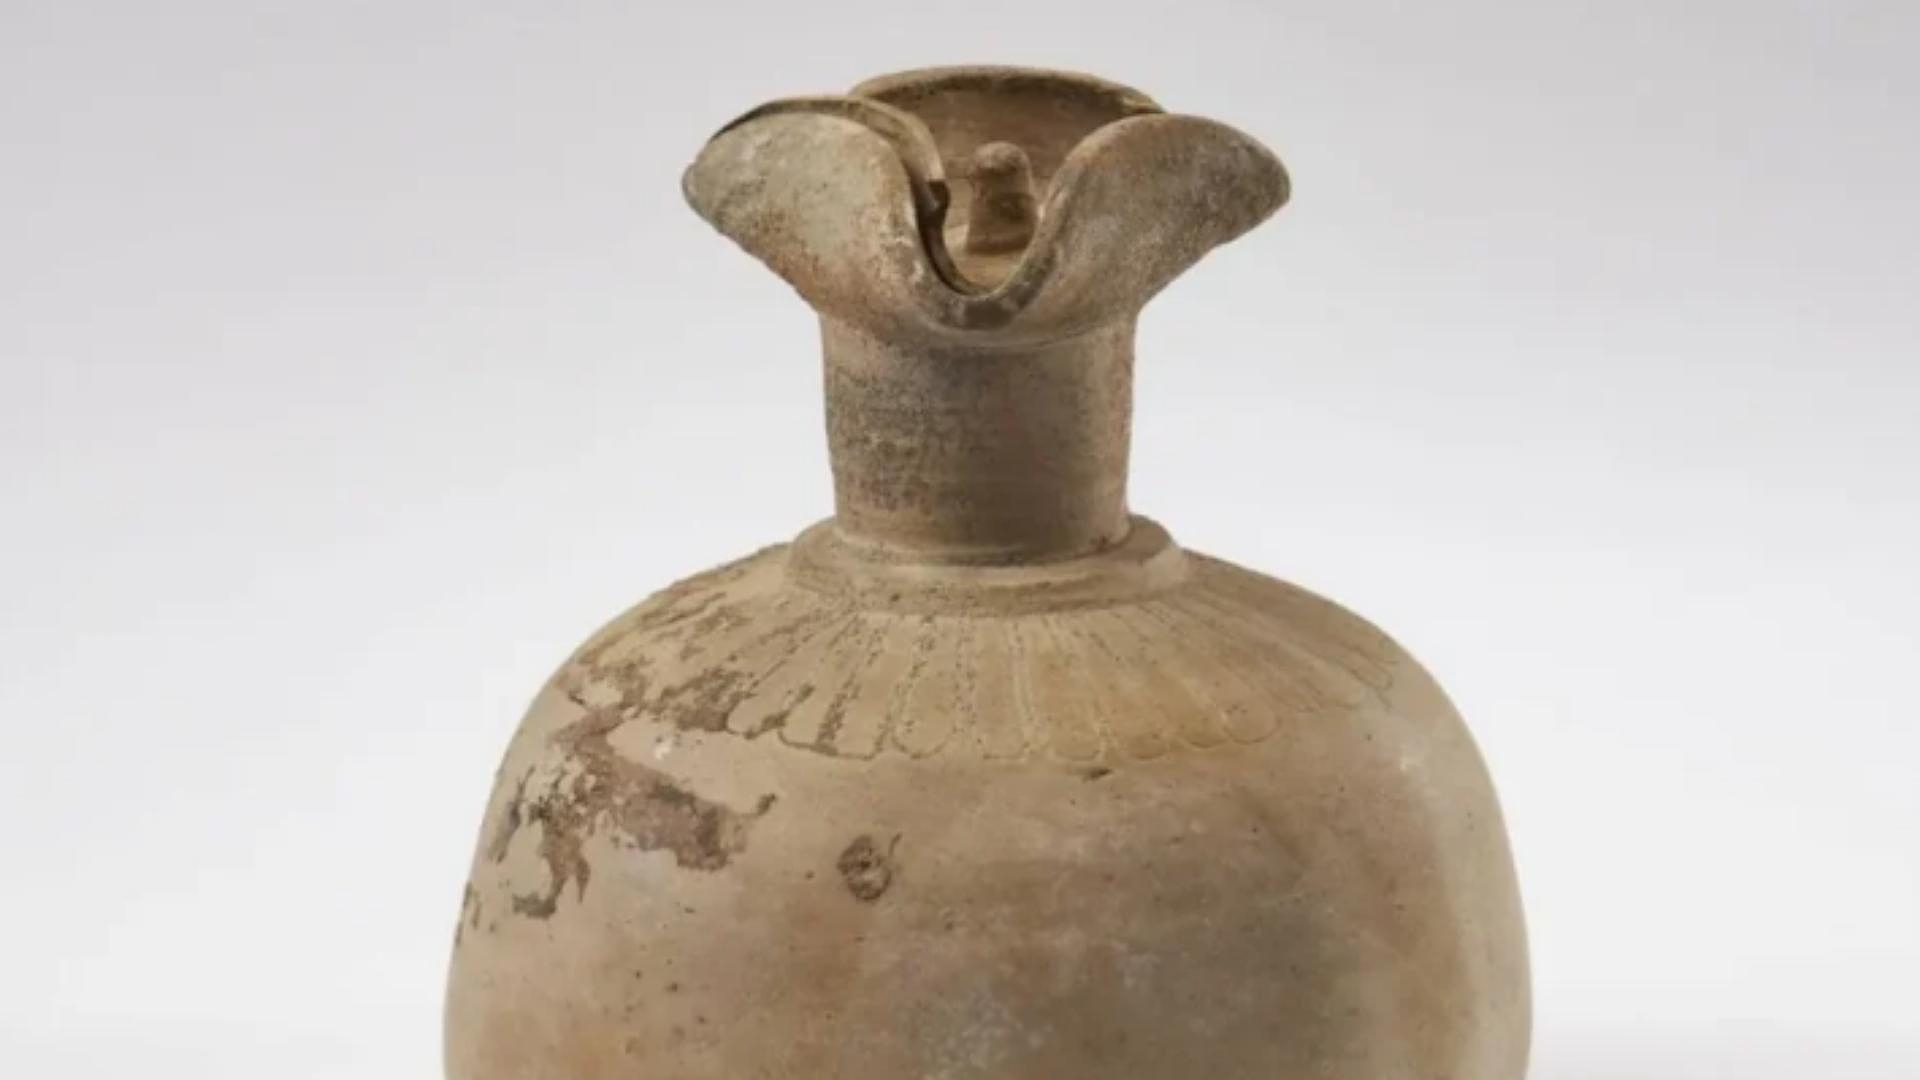 Germany returns antique jug stolen by Nazis to Greece